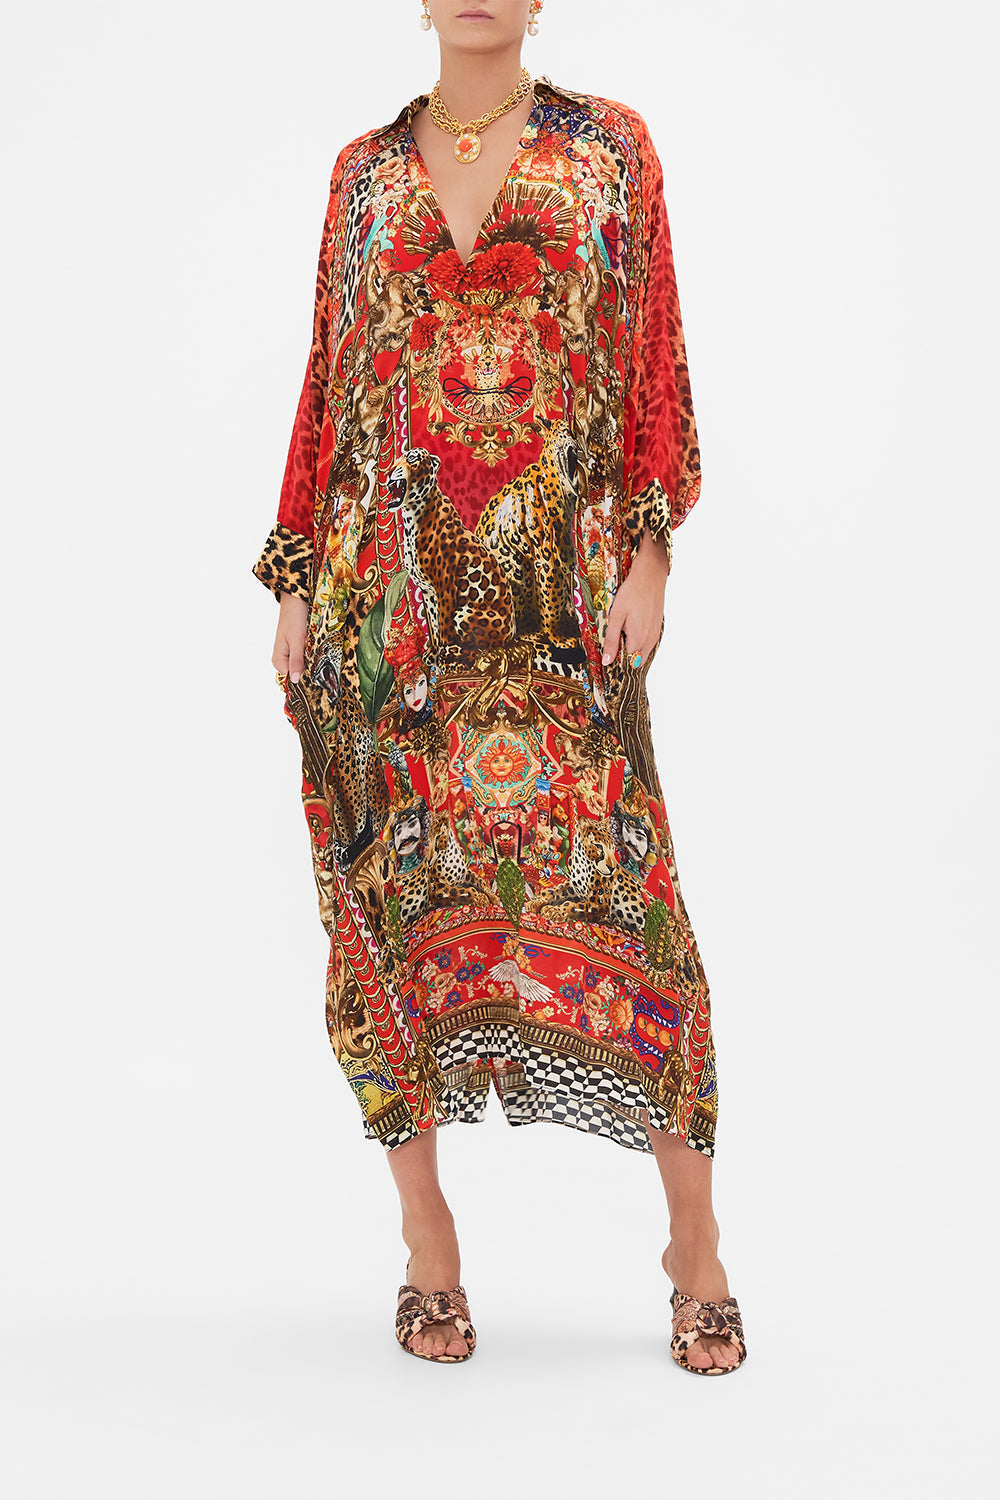 Front view of model wearing CAMILLA printed silk kaftan in From Generation to Generation print